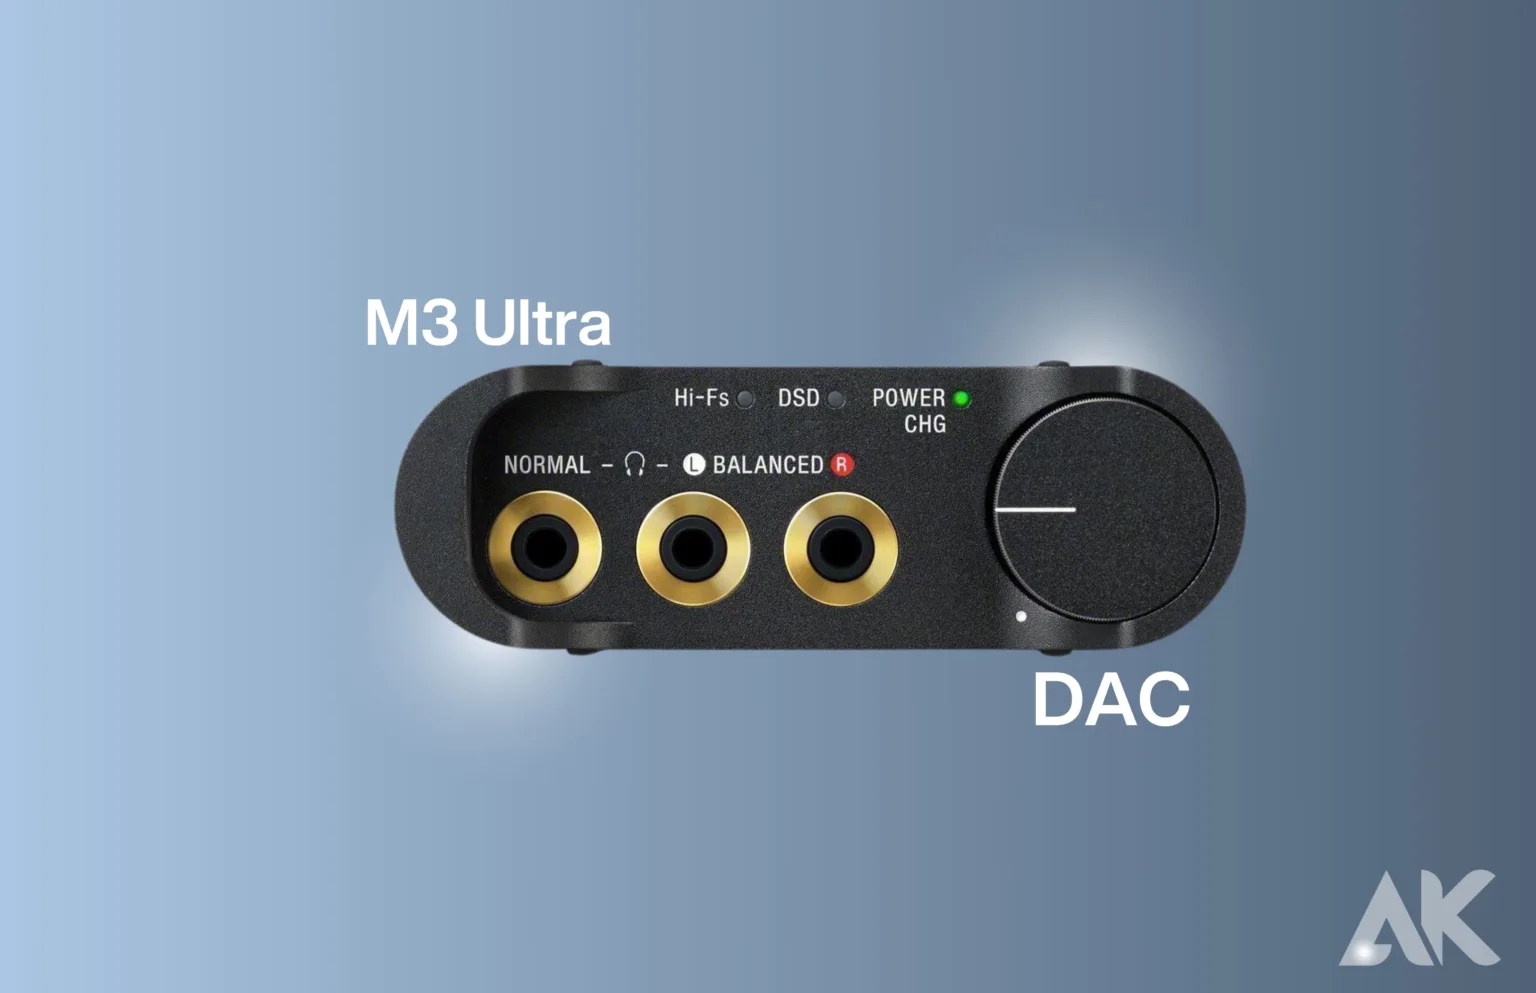 M3 Ultra DAC Comparison: How Does It Stack Up Against the Competition?